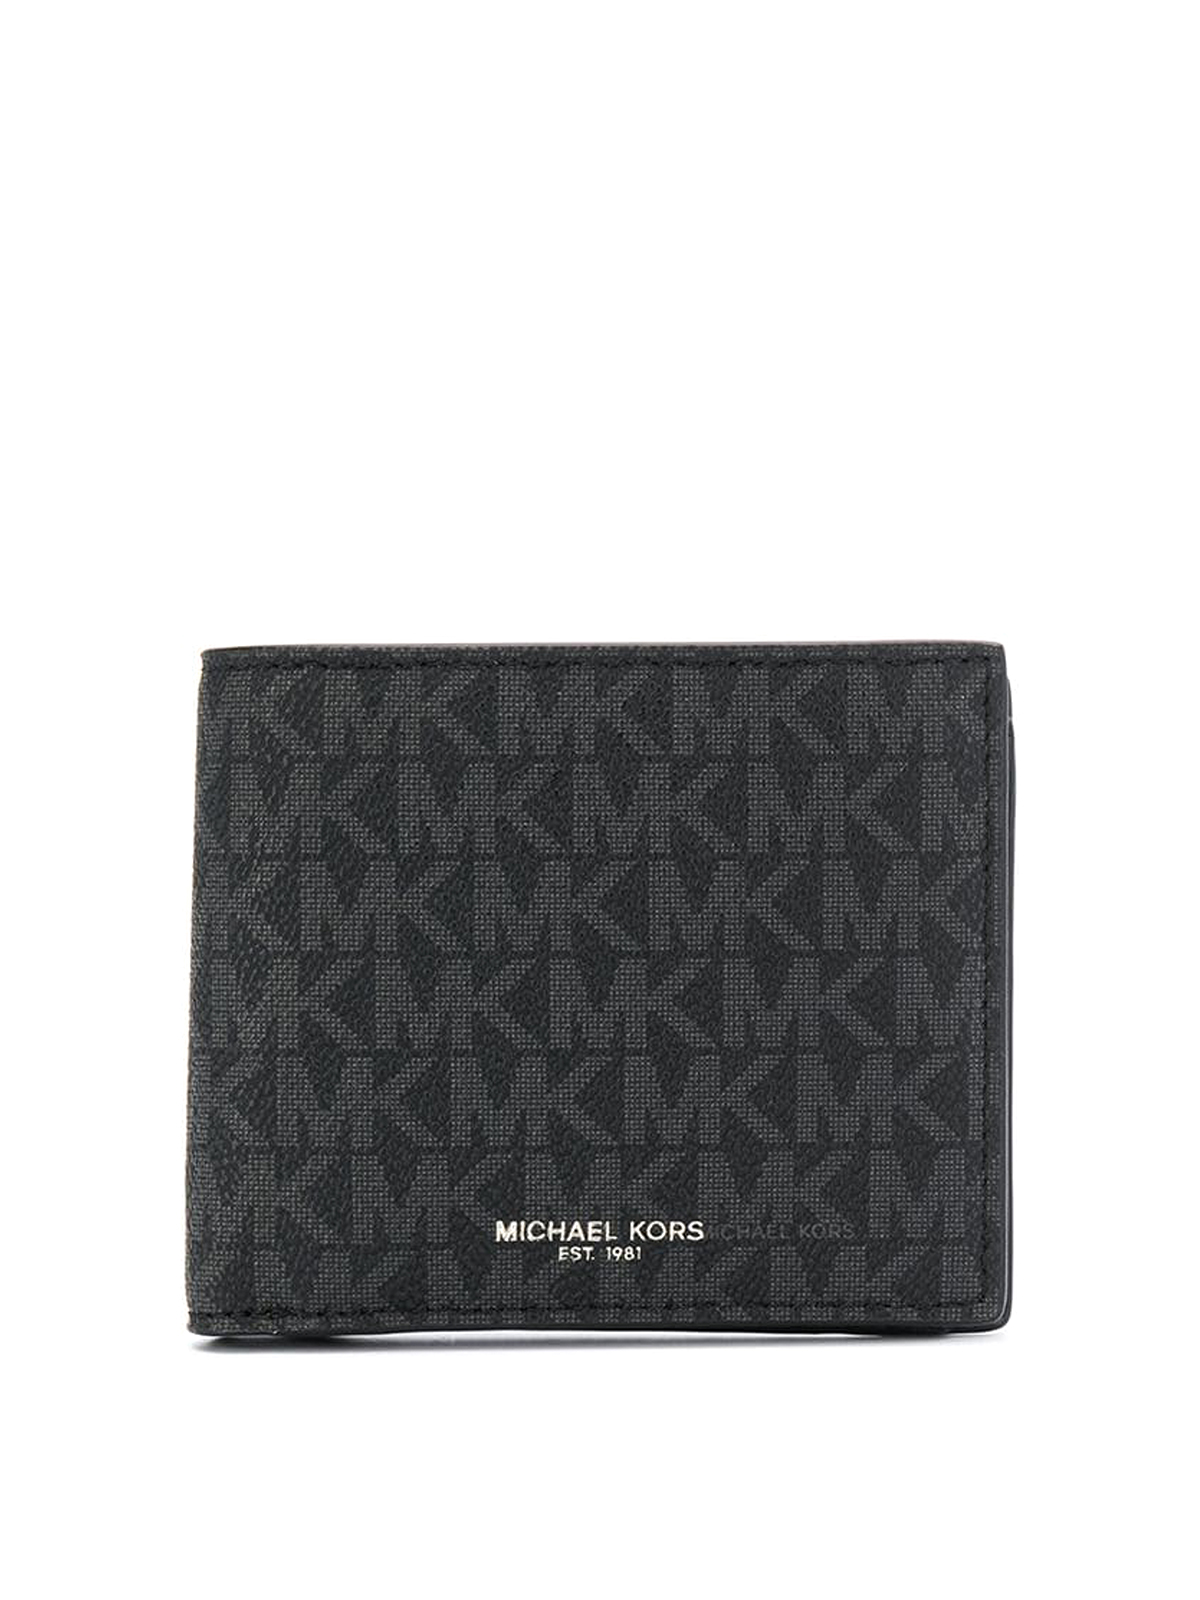 Michael Kors Billfold With Coin Pocket In Black